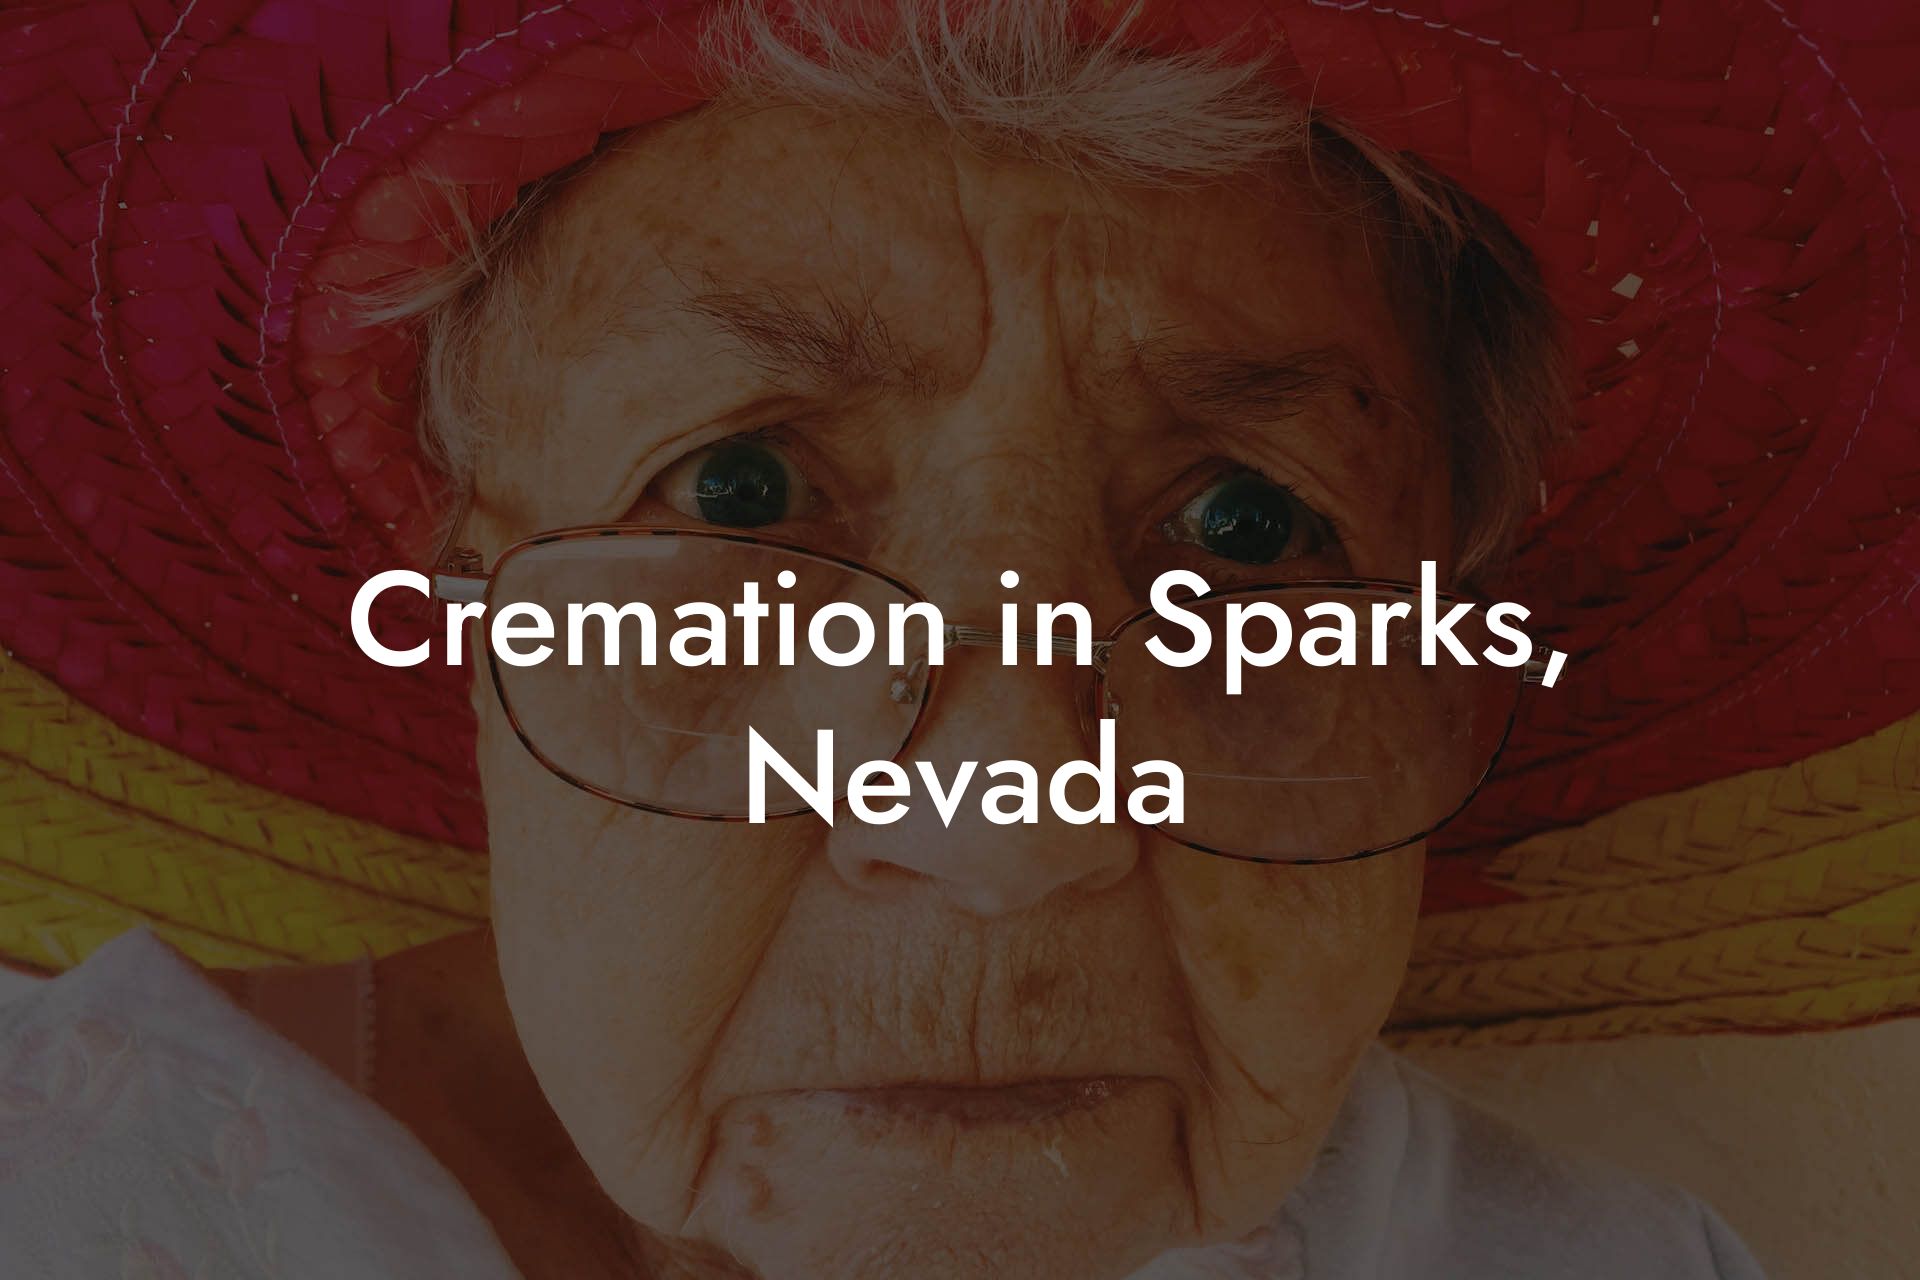 Cremation in Sparks, Nevada